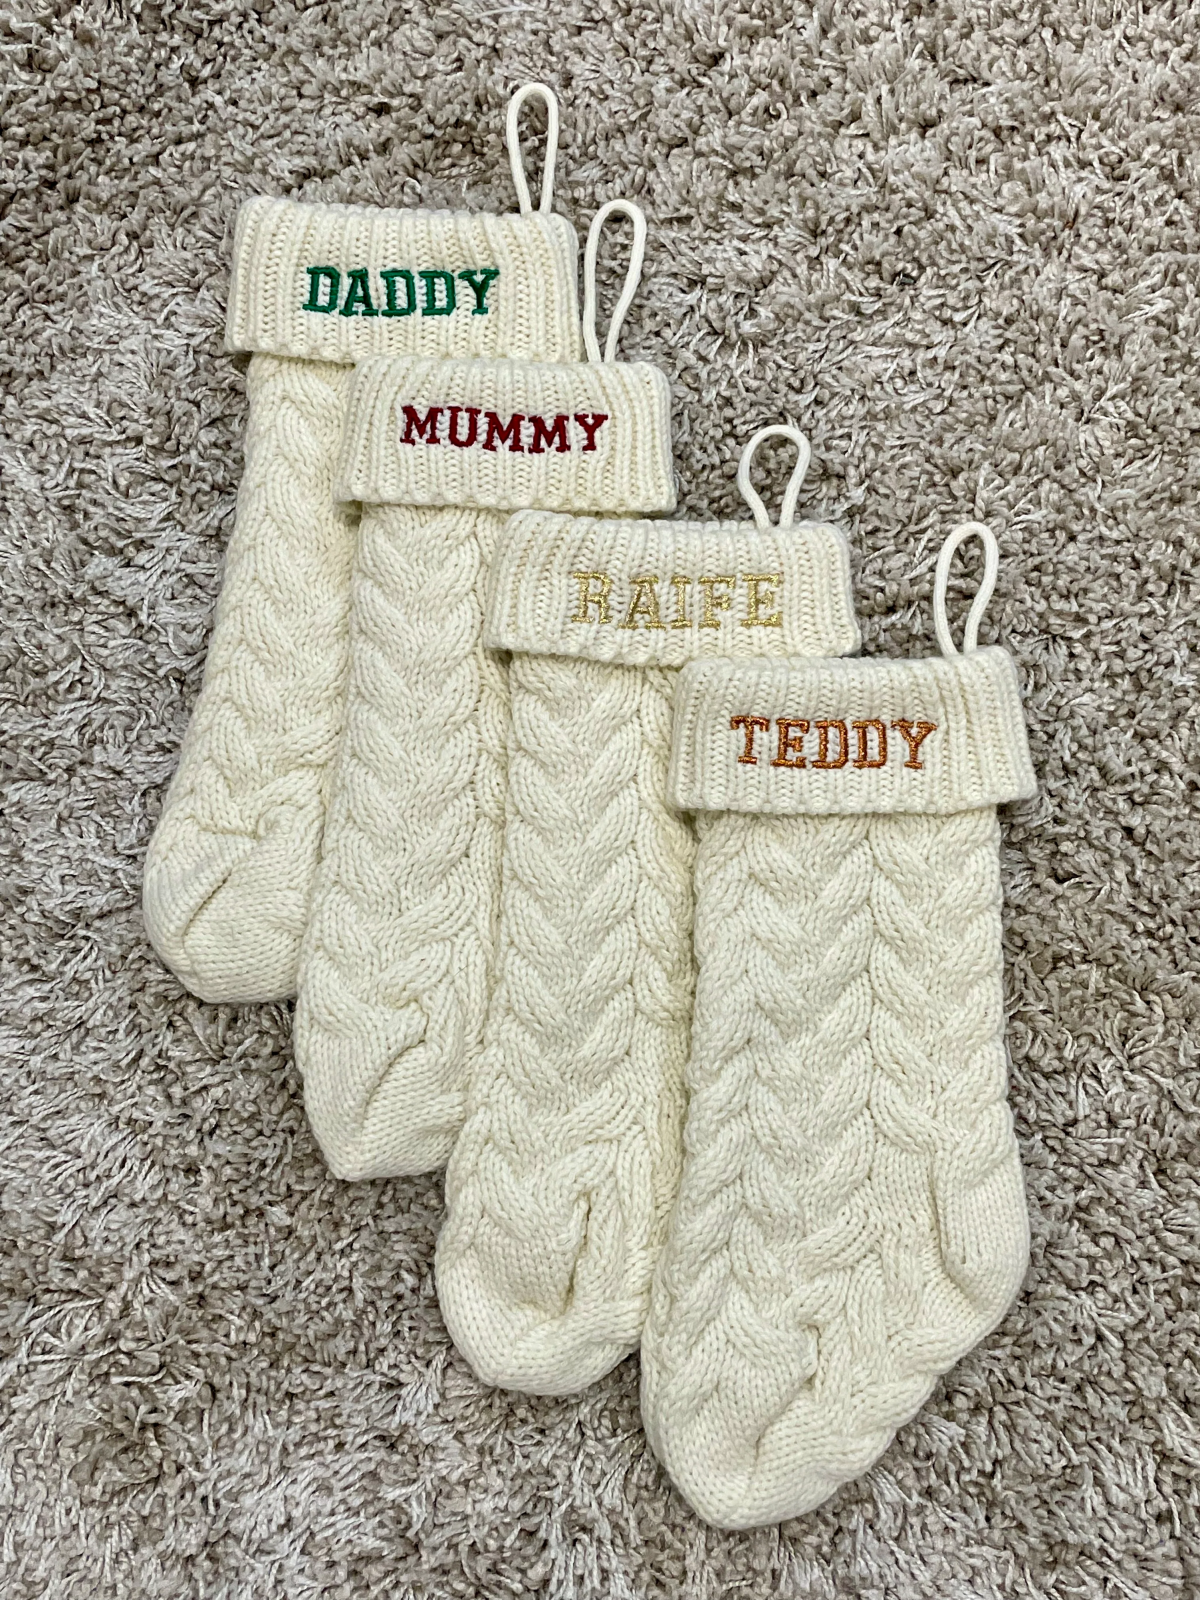 how to write names on a christmas stocking sewing.jpg